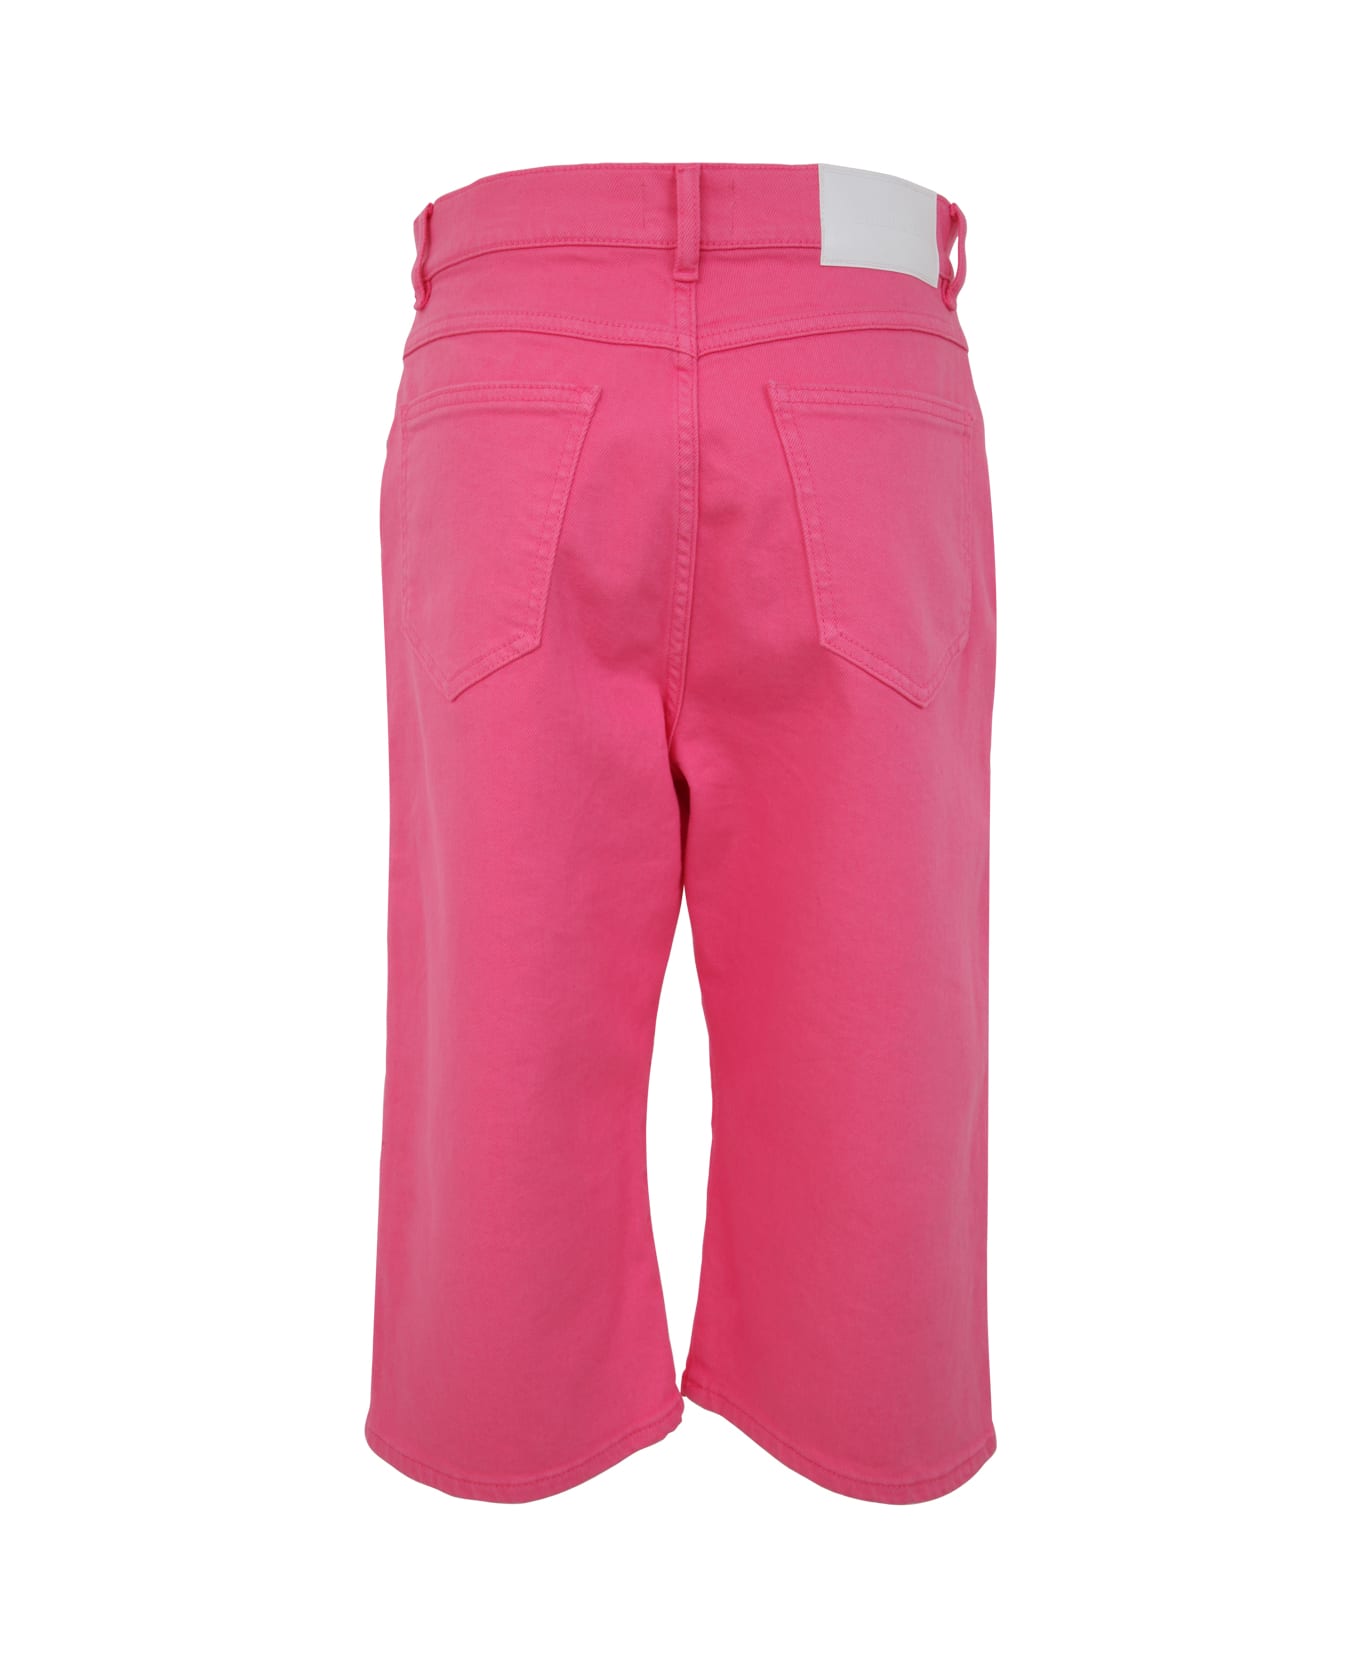 Parosh Drill Cotton Trousers - Pink ボトムス